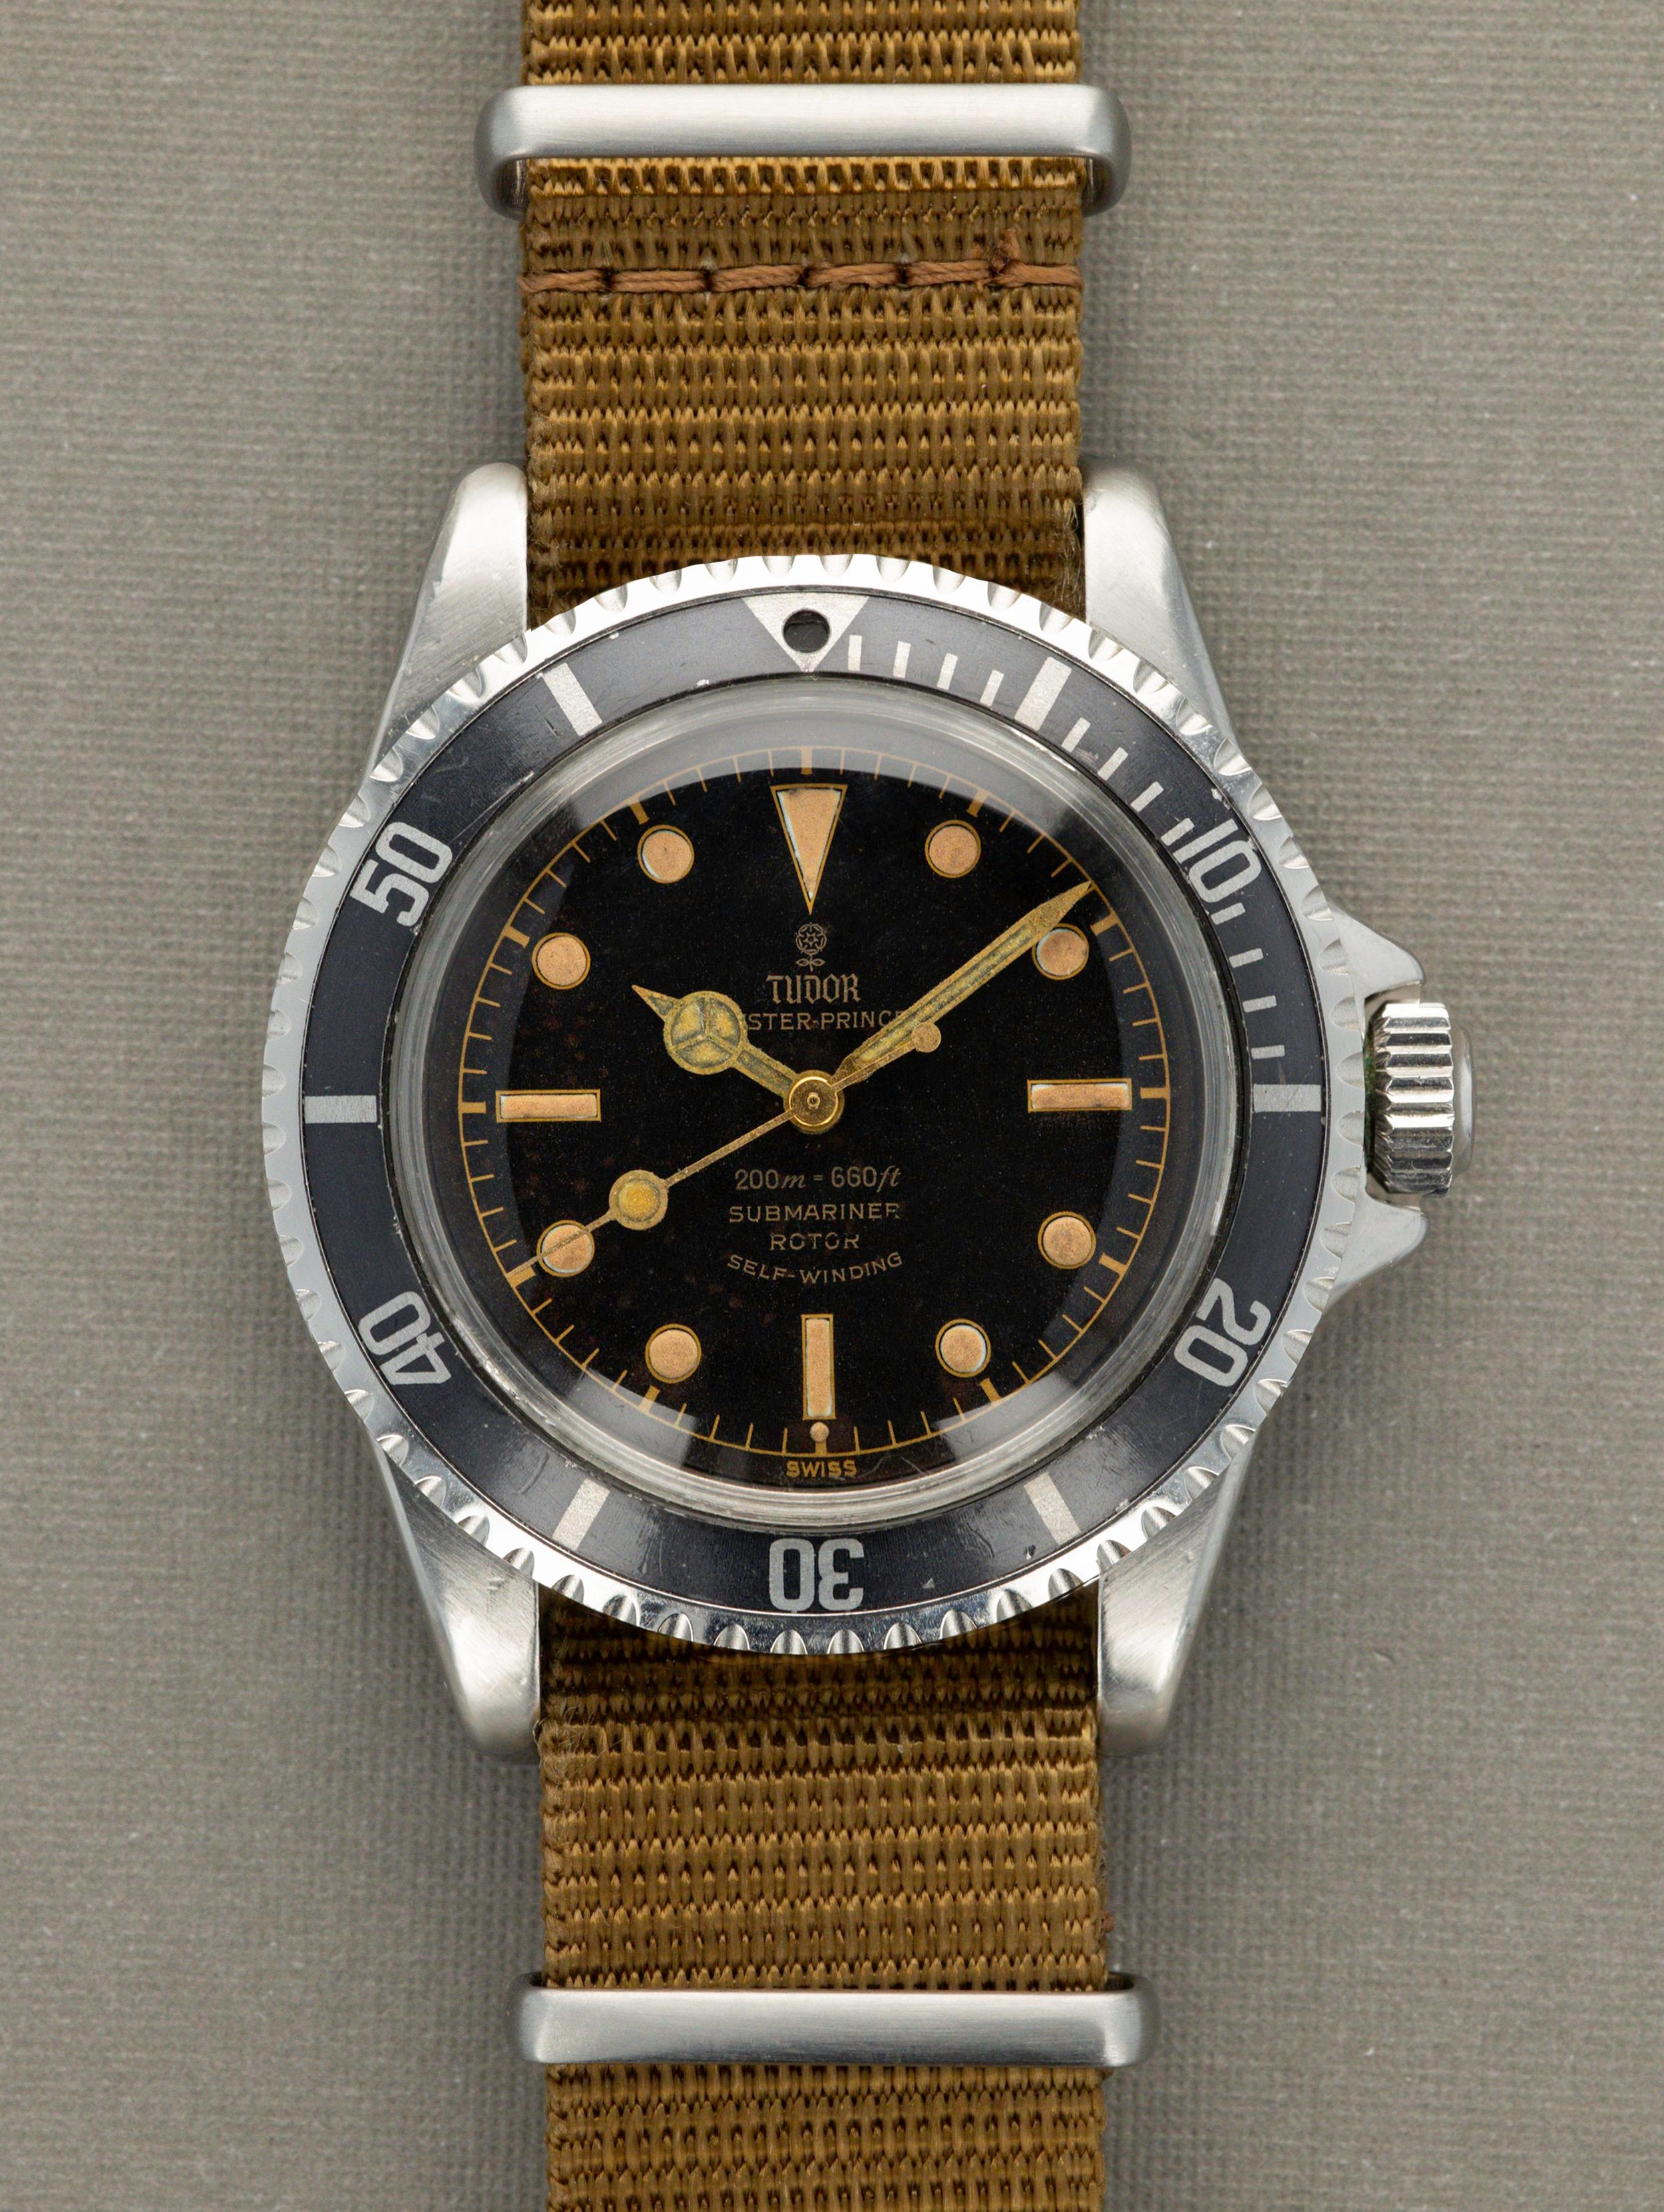 Tudor Submariner Ref. 7928 - Pointed Crown Guards, Exclamation Point